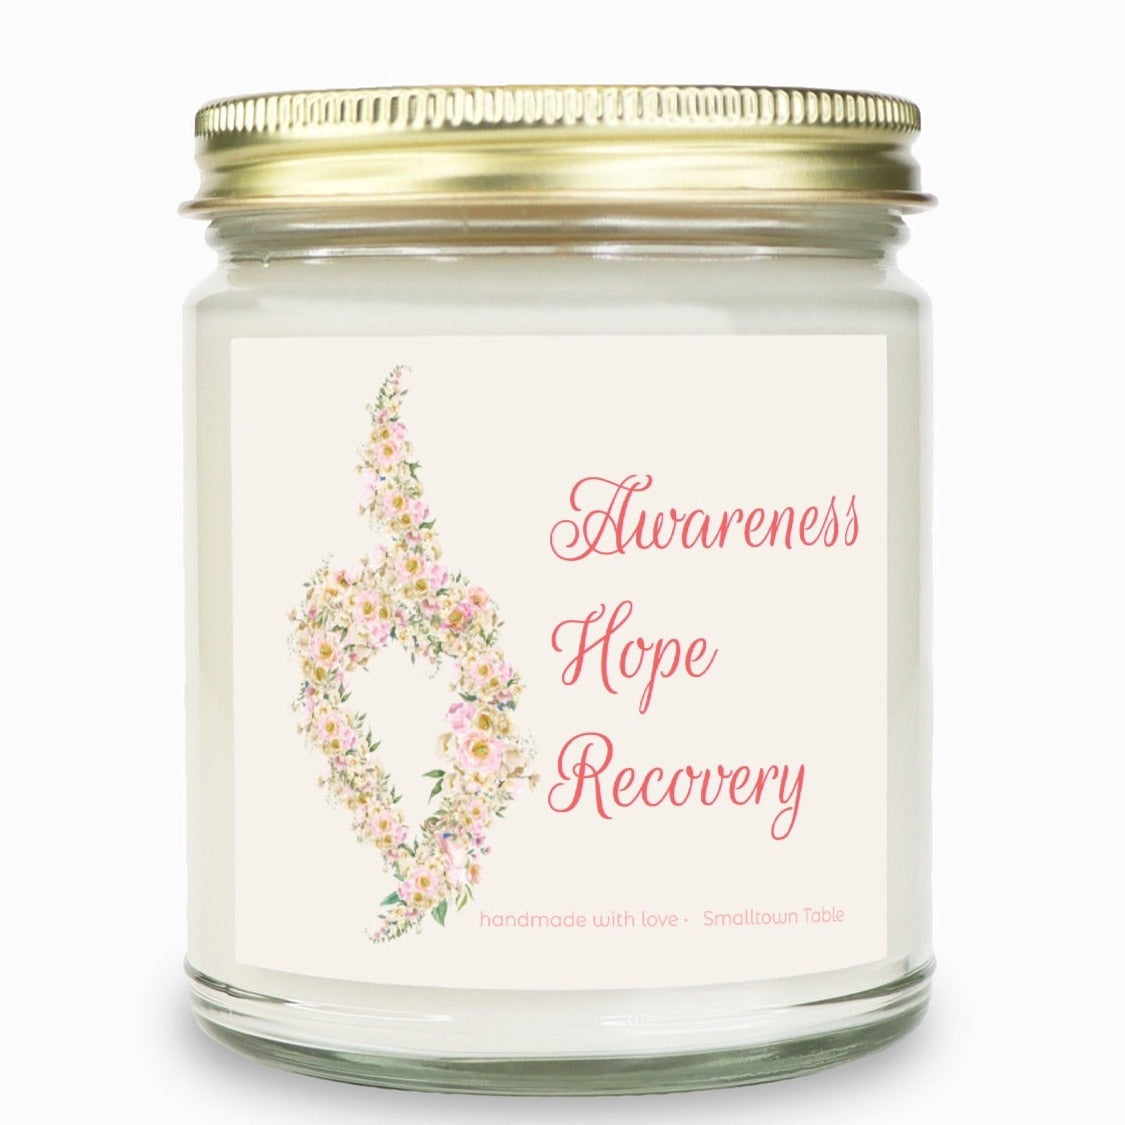 eating disorder symbol covered in flowers Awareness Hope Recovery